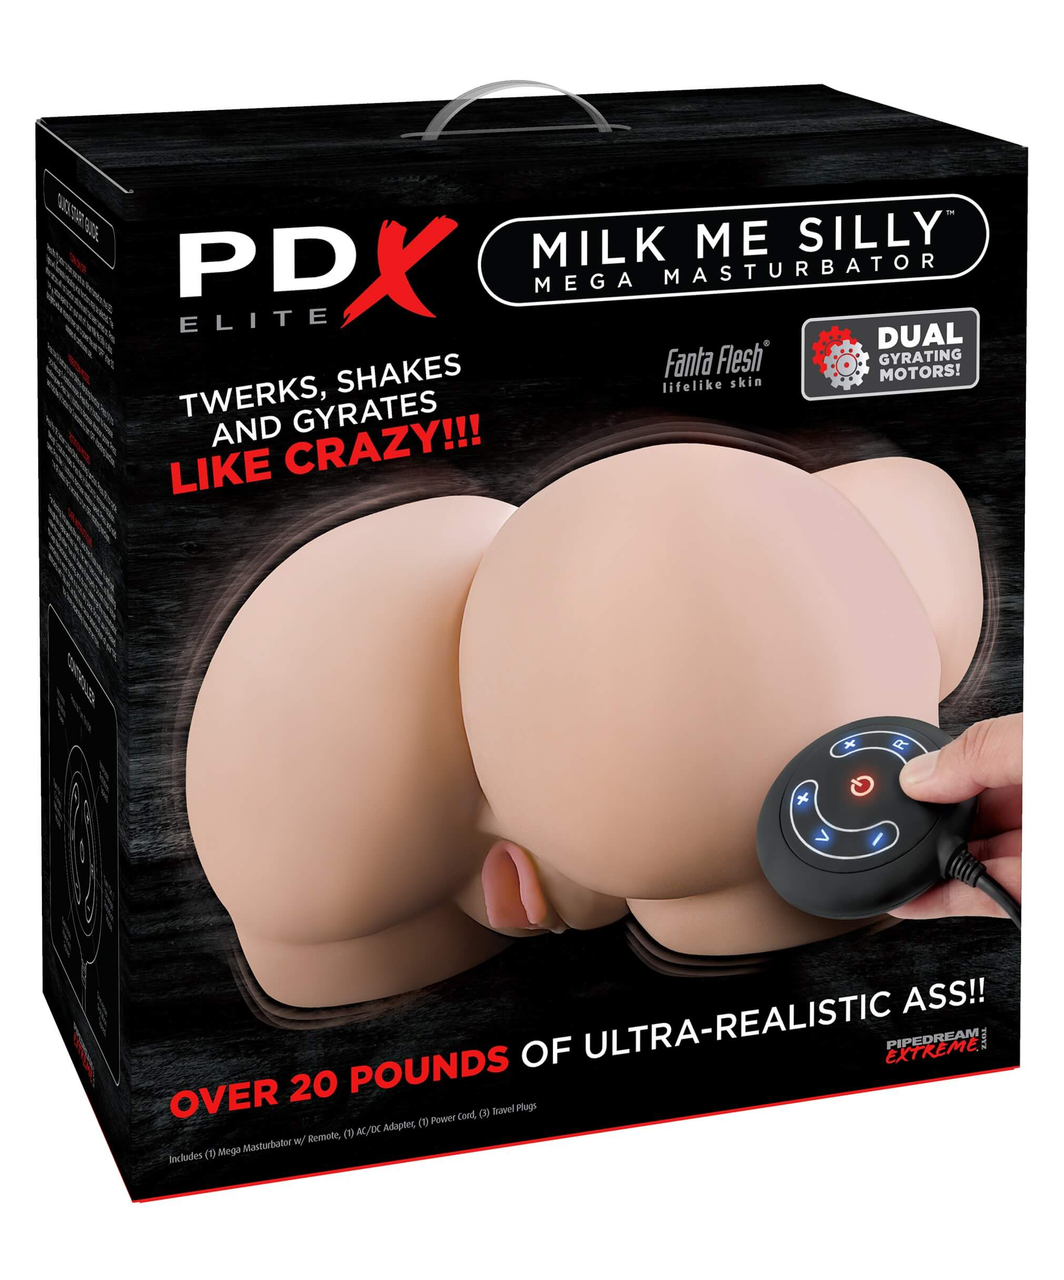 Pipedream Extreme PDX Elite Milk Me Silly Dual Gyrating Motors